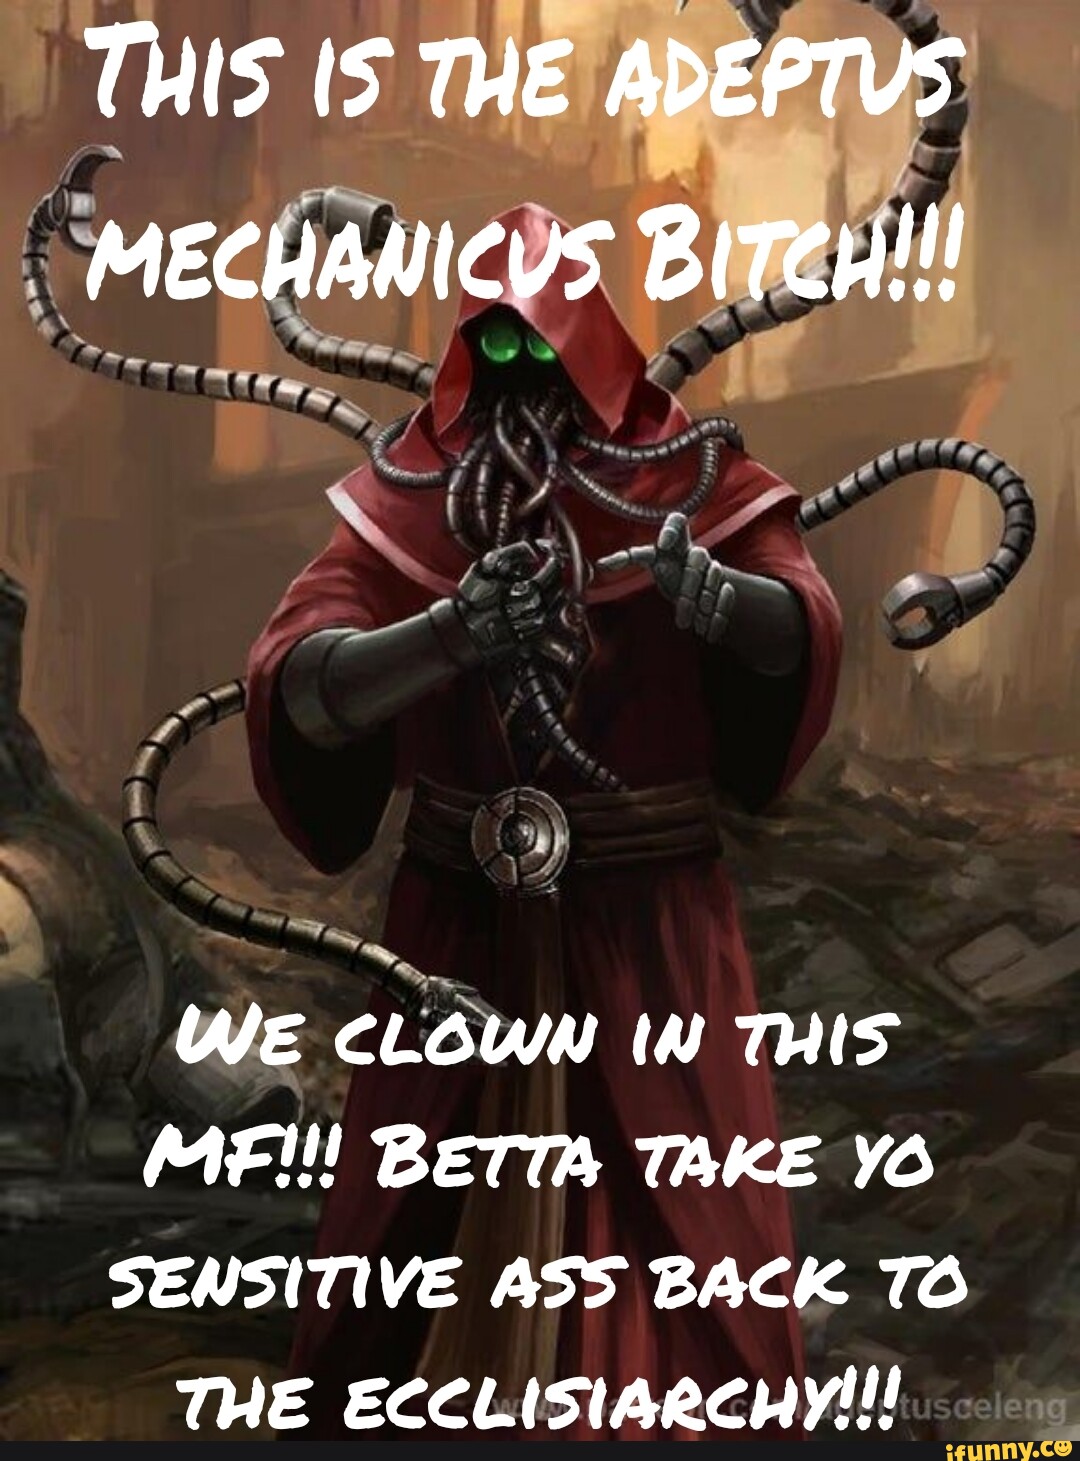 THIS IS THE ADEPTUS MECHANICUS BiTCH!!! We CLOWN IN THIS MF!!! BET TAKE